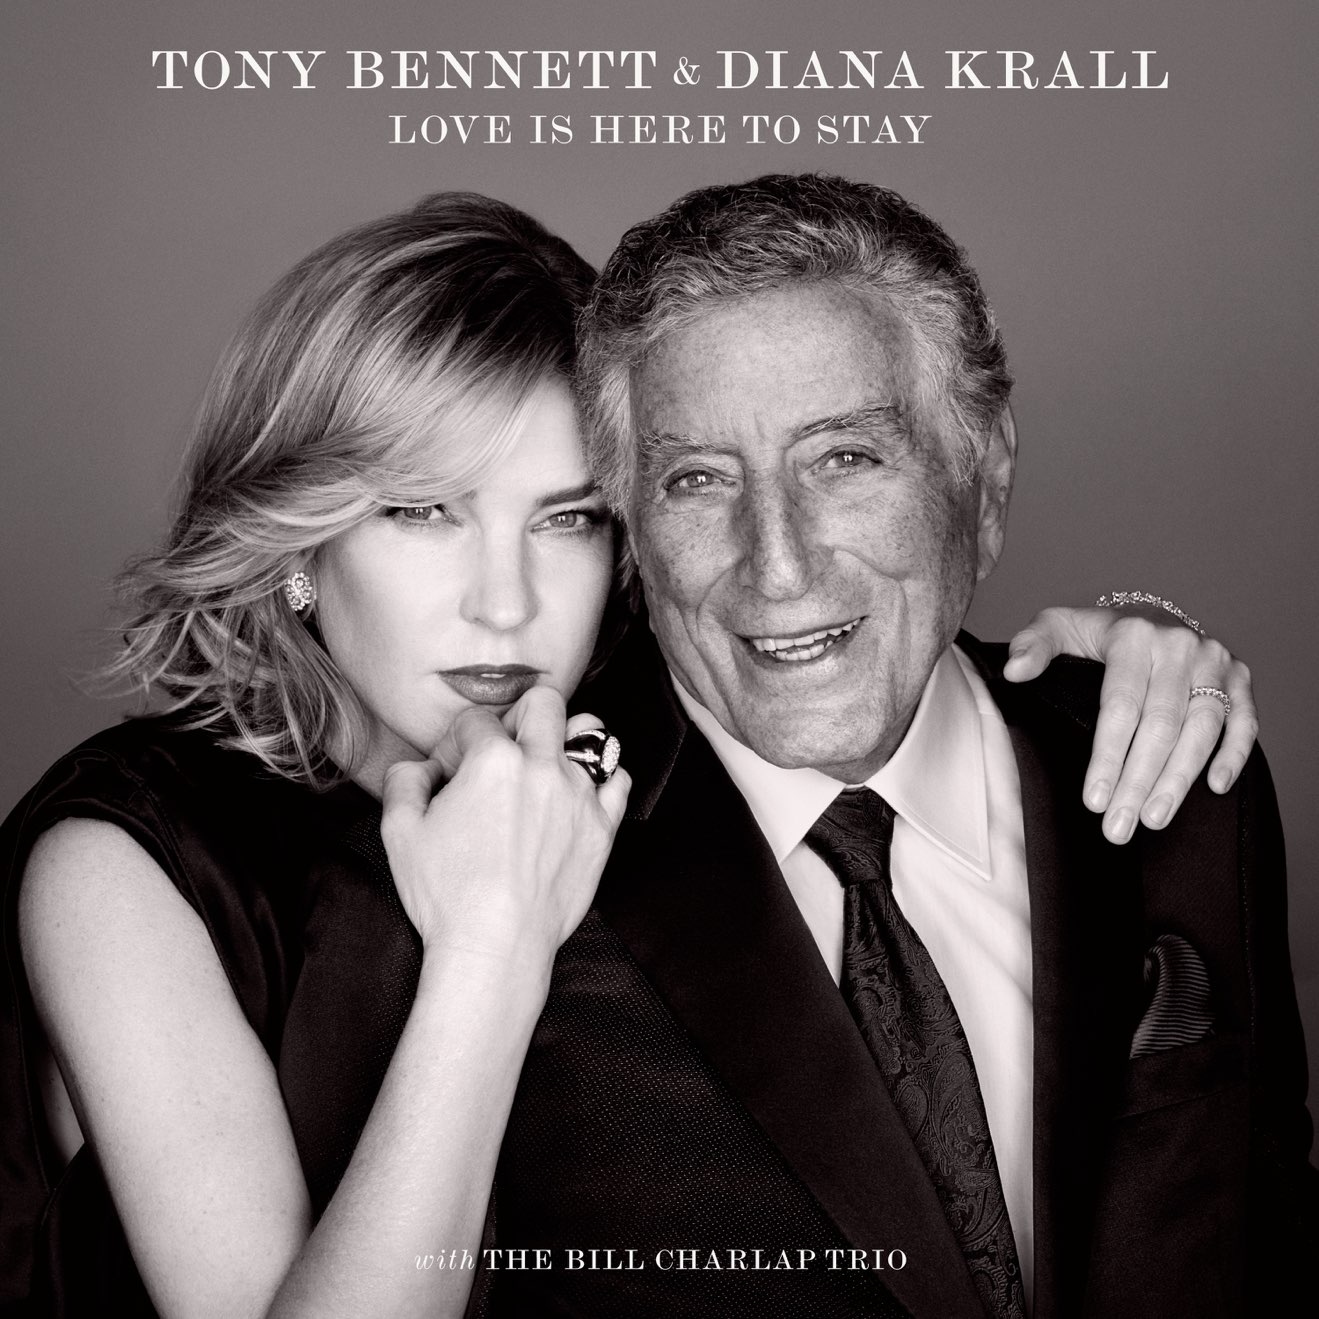 Tony Bennett & Diana Krall – Love Is Here to Stay (2018) [iTunes Match M4A]